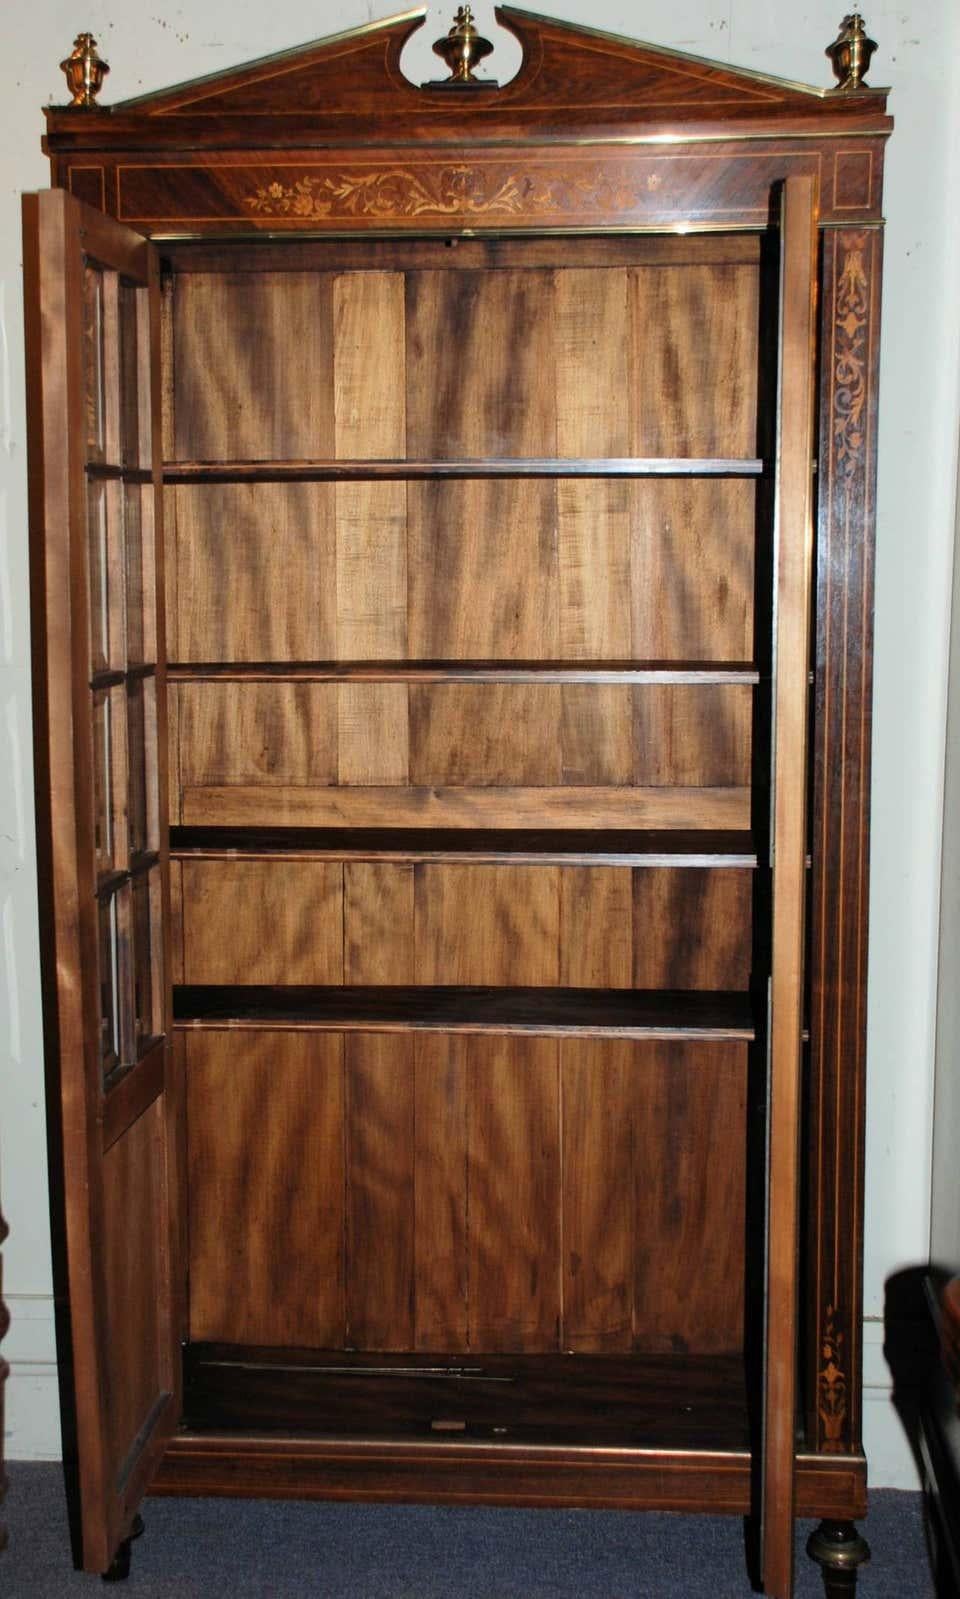 Antique French Charles X style rosewood and satinwood vitrine bookcase, circa 1860s.